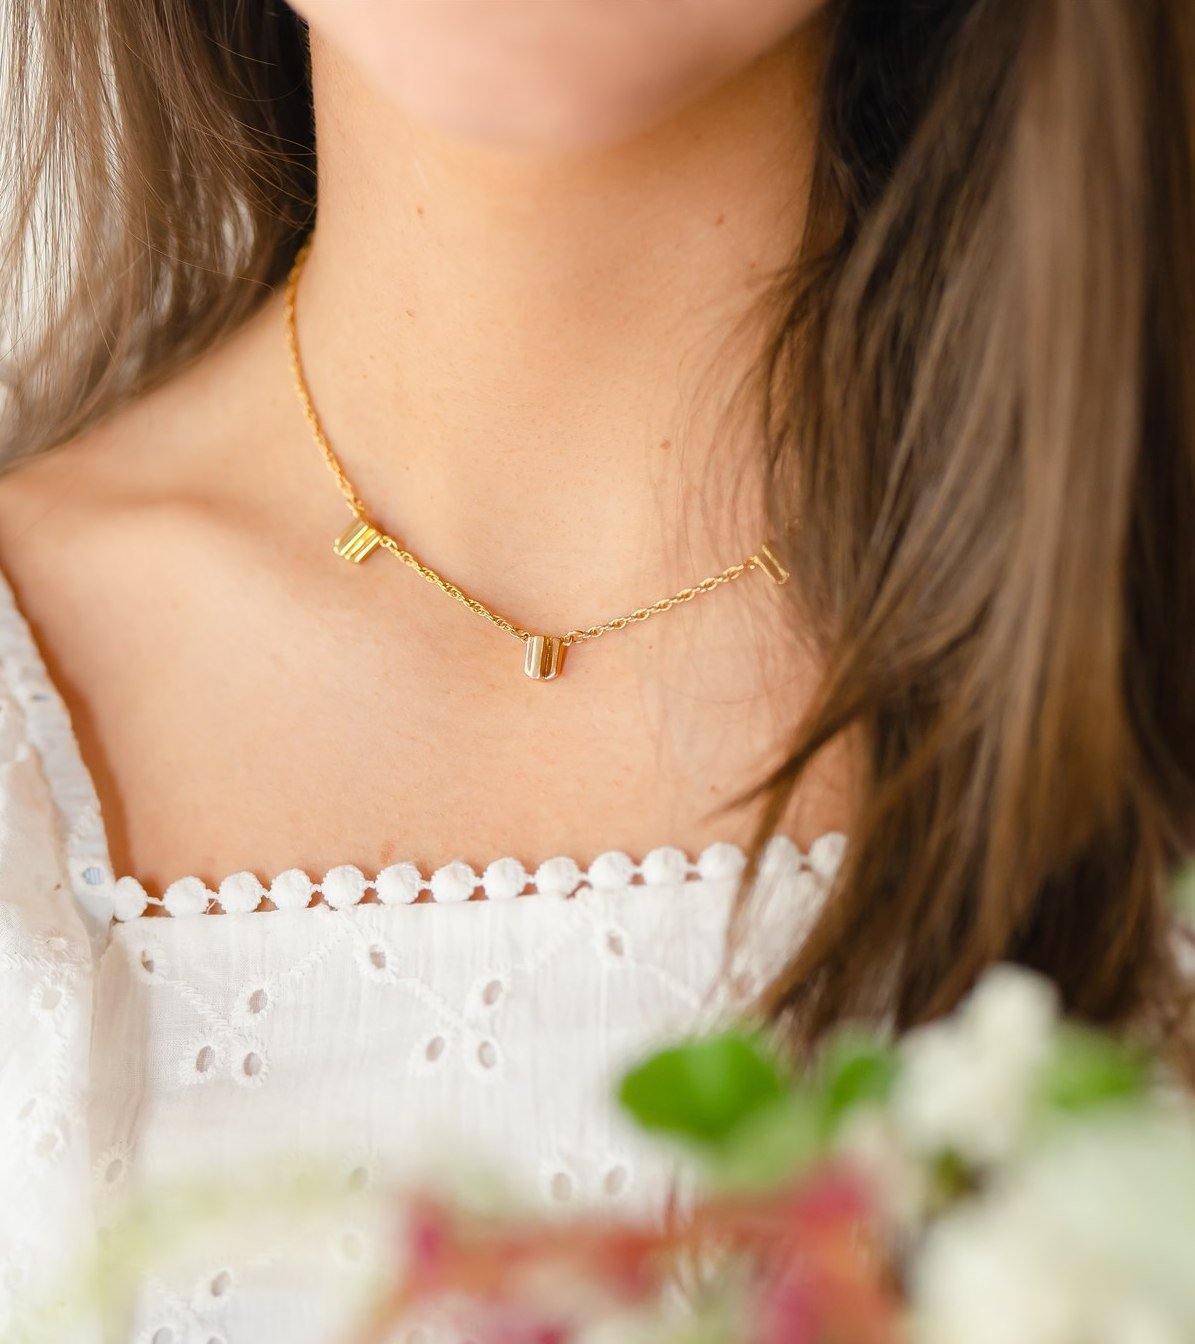 the gold layered dome necklace - VUE by SEK